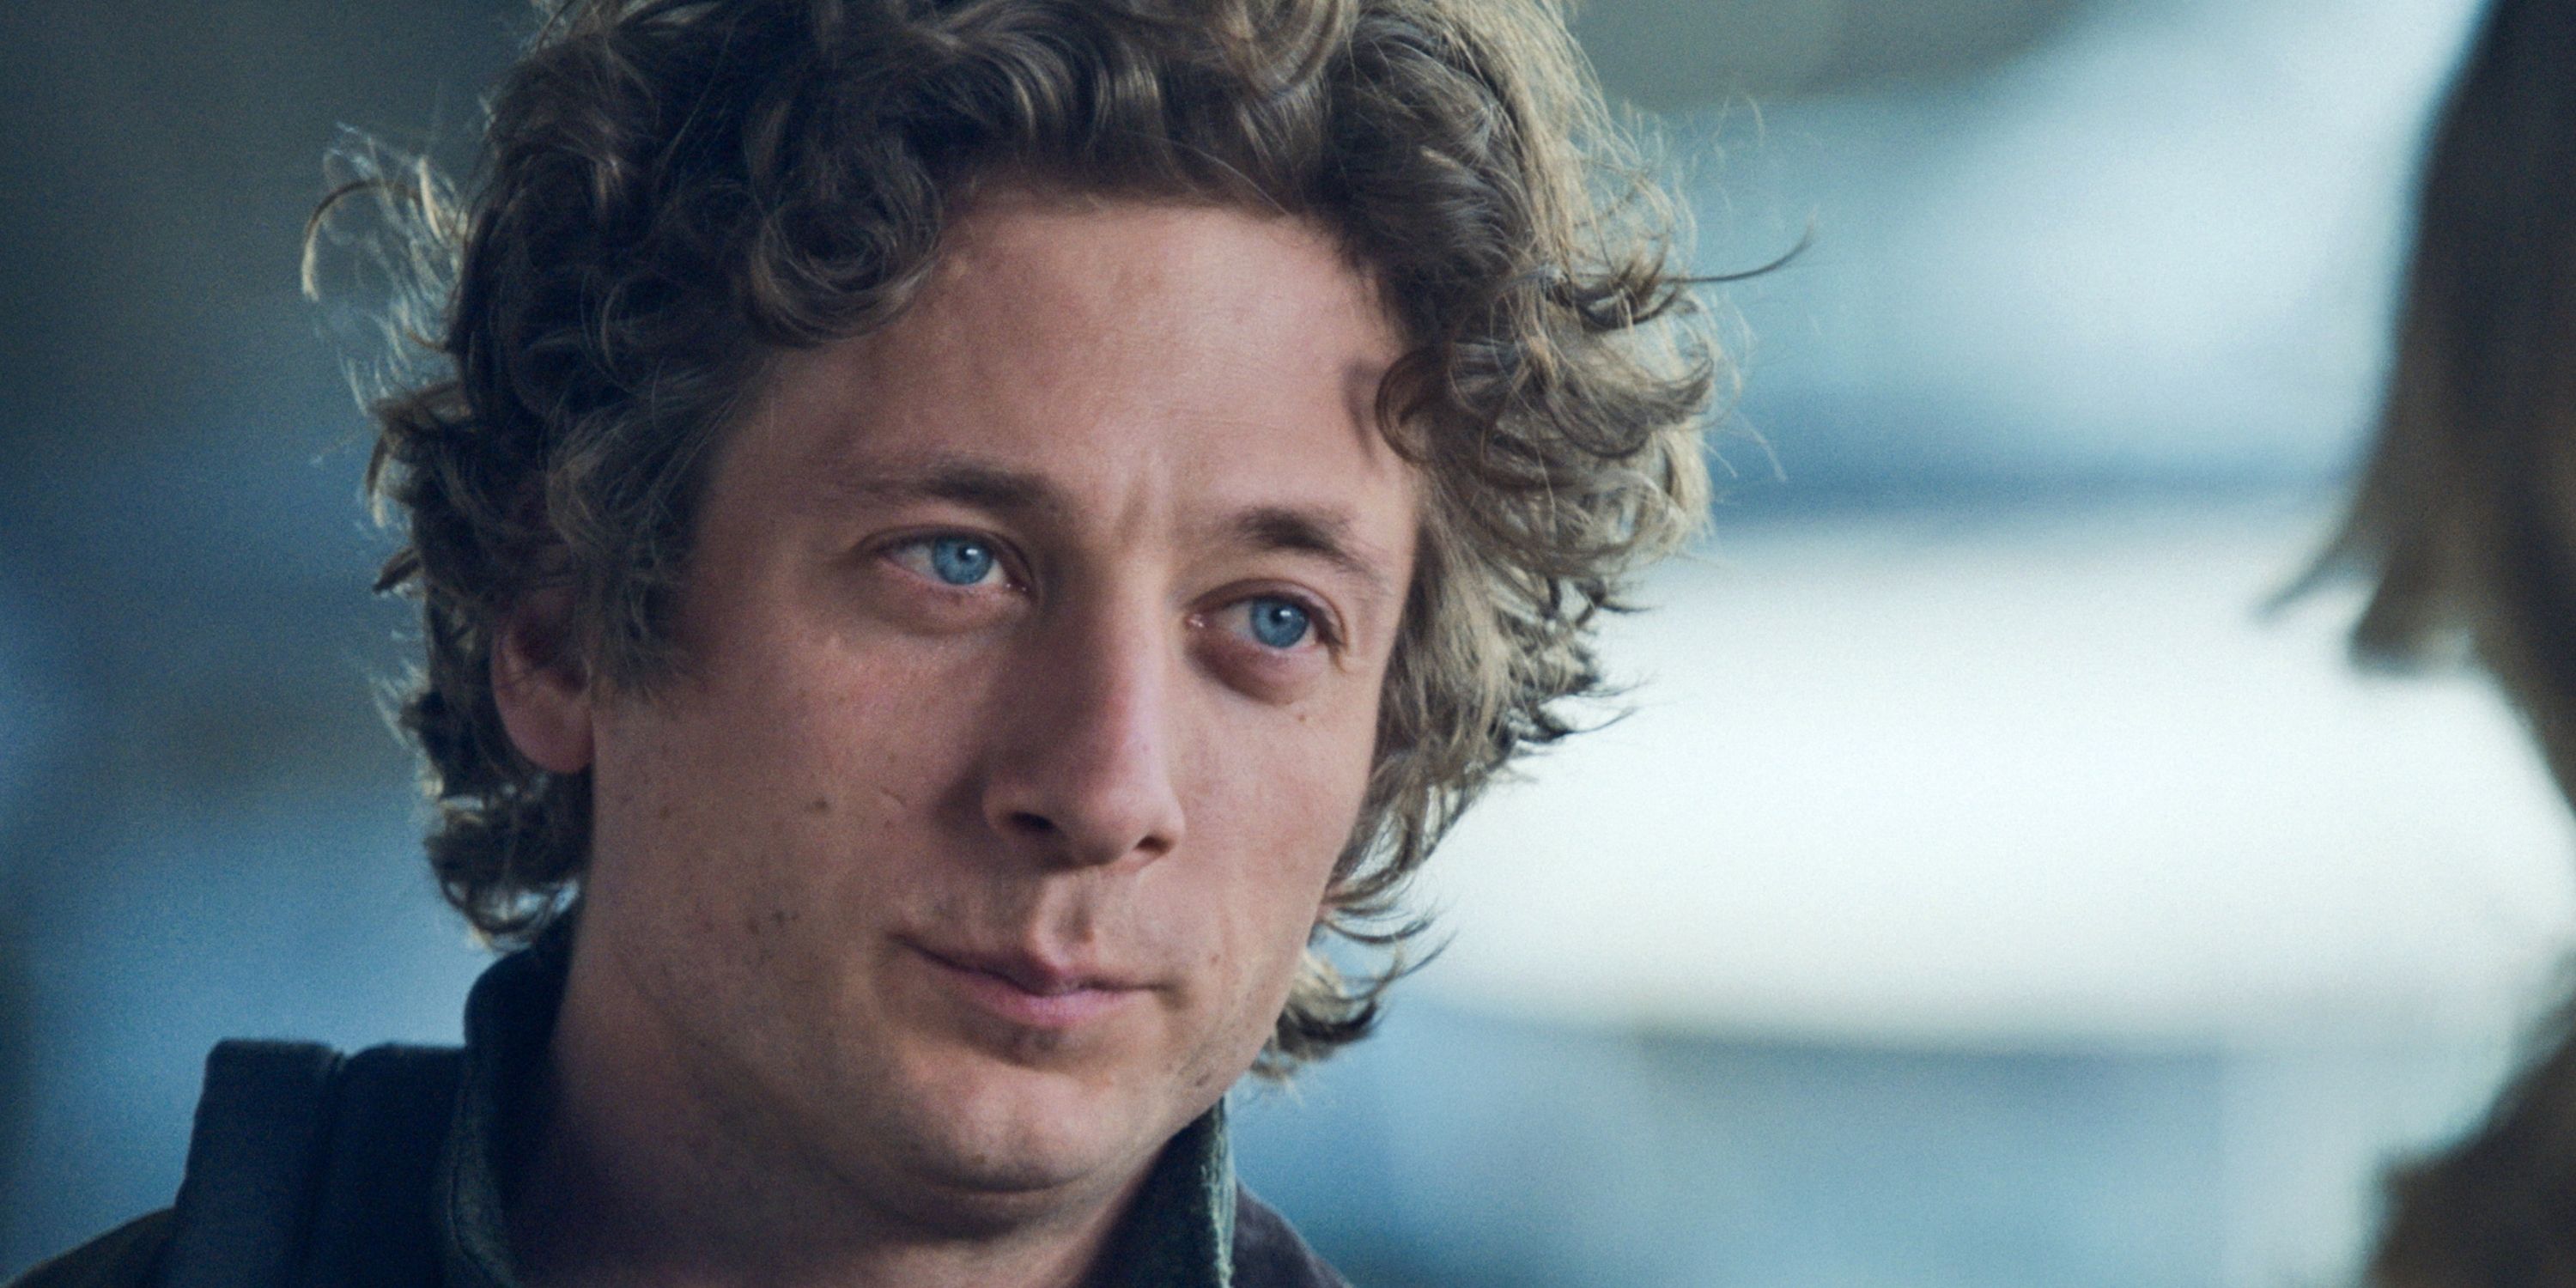 Jeremy Allen White as Carmen "Carmy" Barzatto in close-up standing across from someone in The Bear